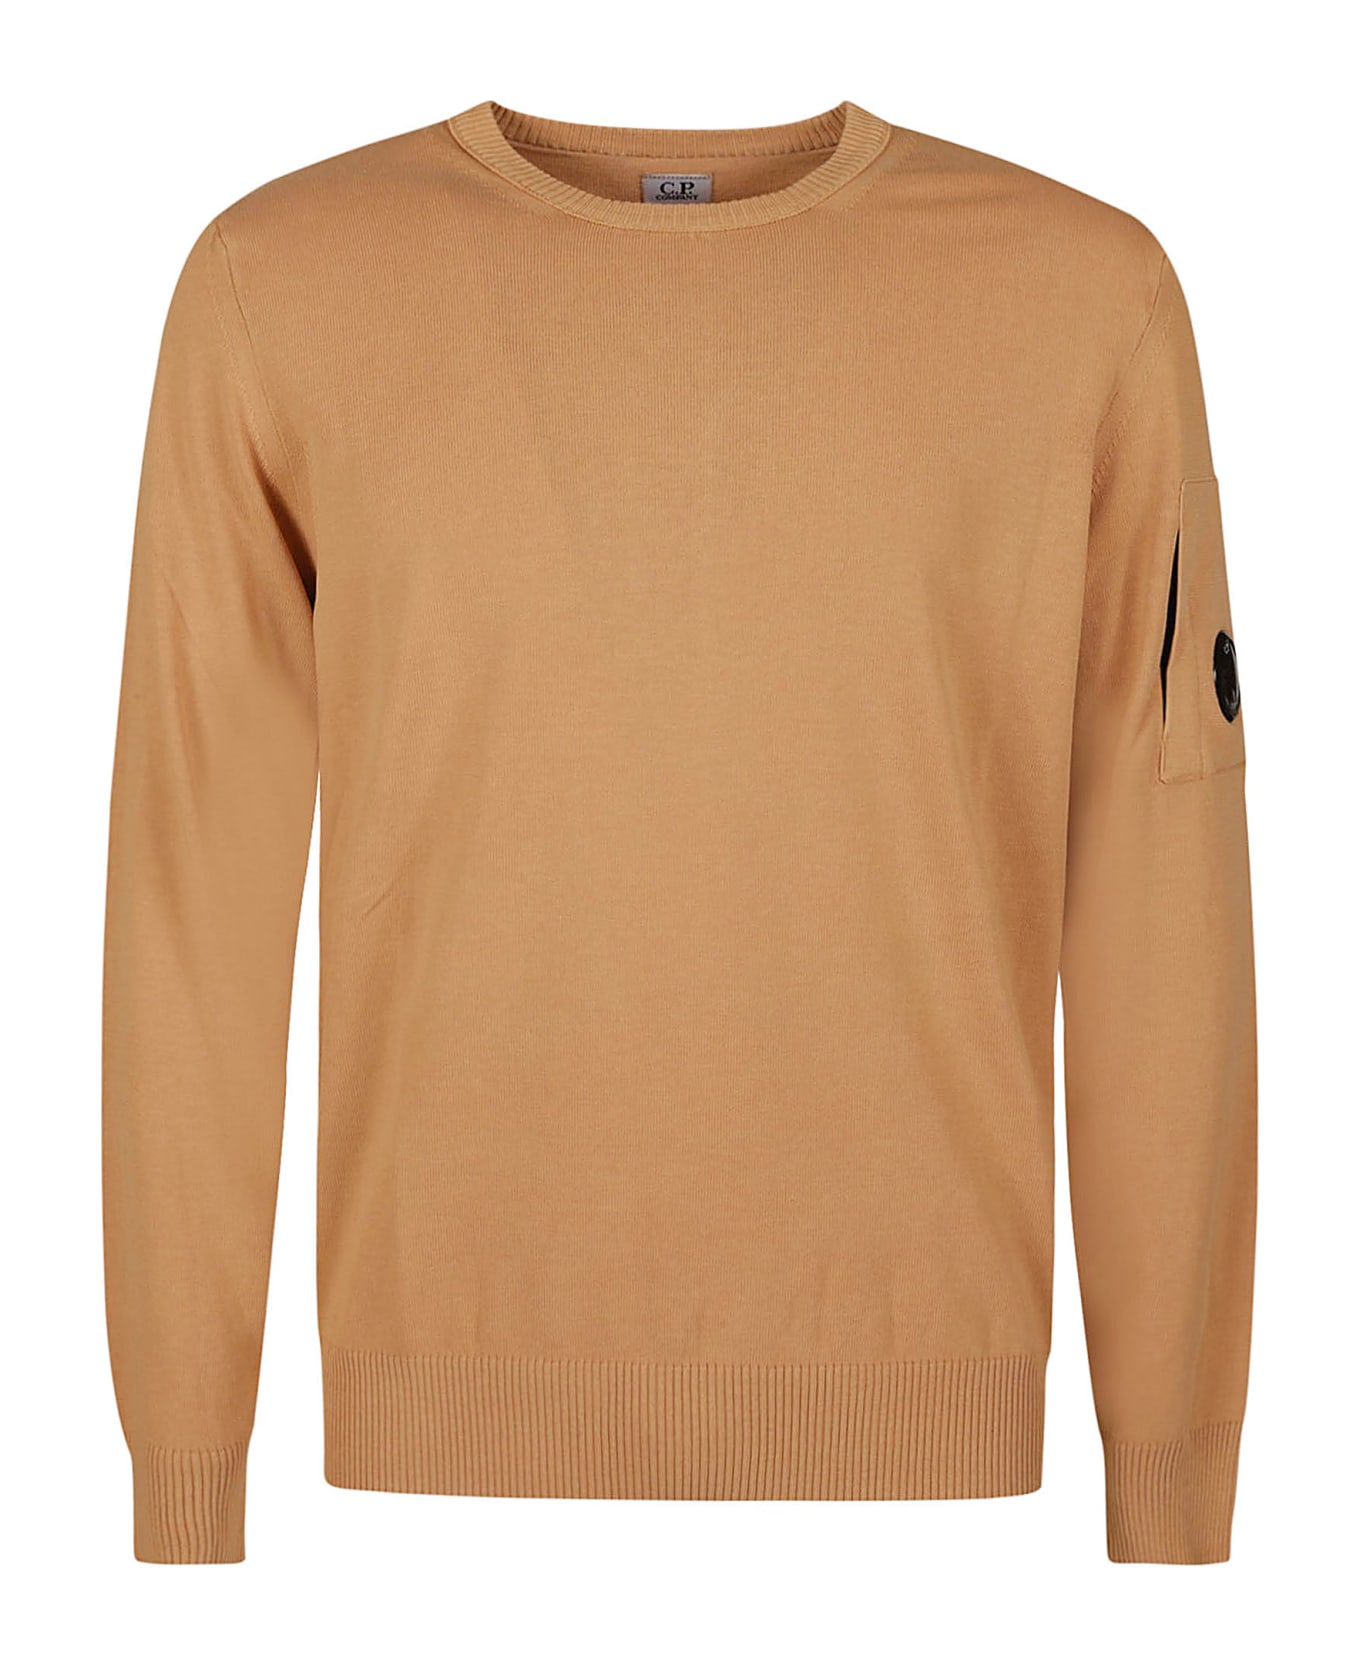 C.P. Company Old Dyed Crepe Sweatshirt - PASTRY SHELL